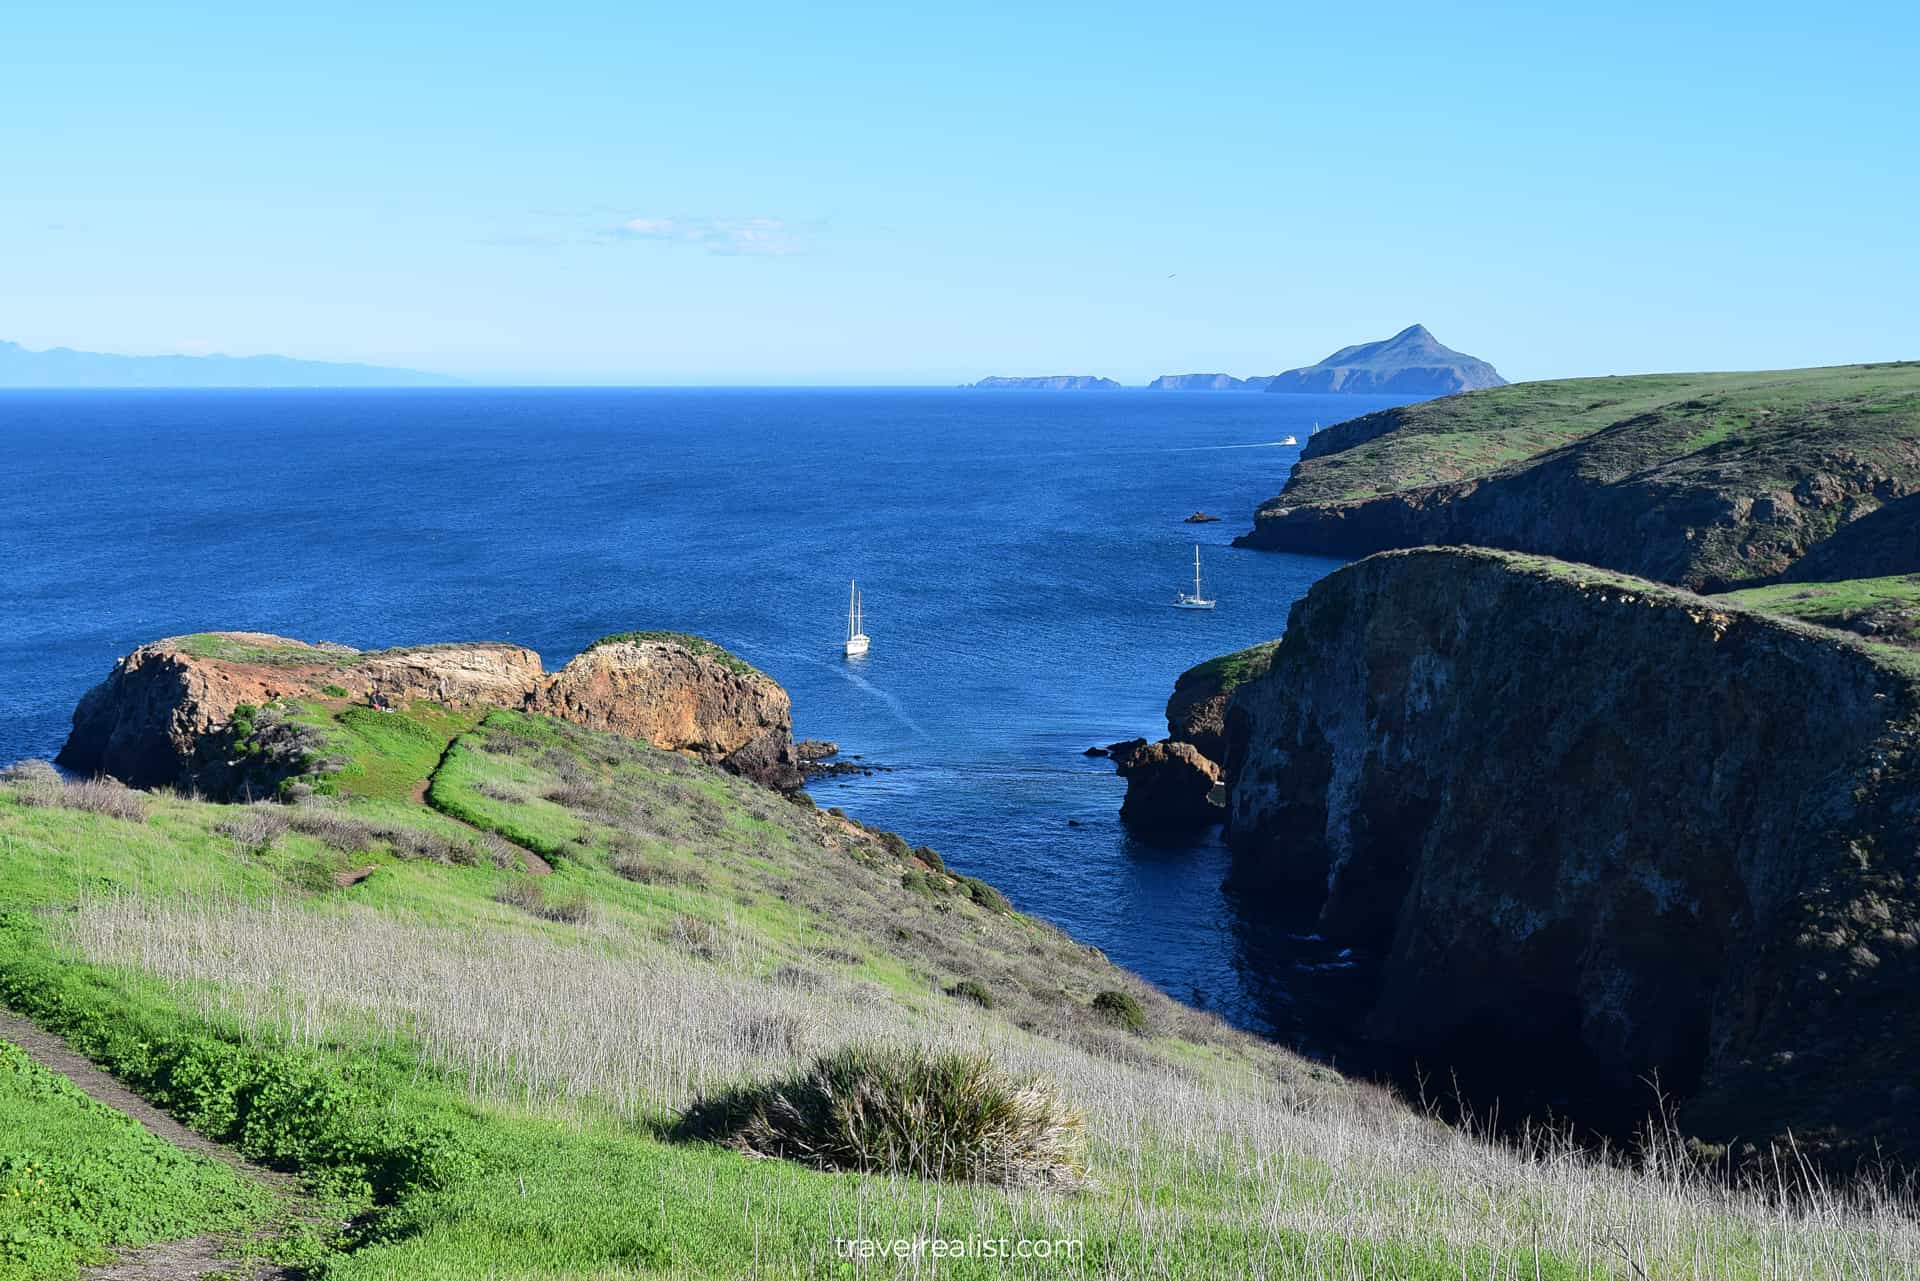 Scorpion Rock and Little Scorpion Anchorage in Channel Islands National Park, California, US